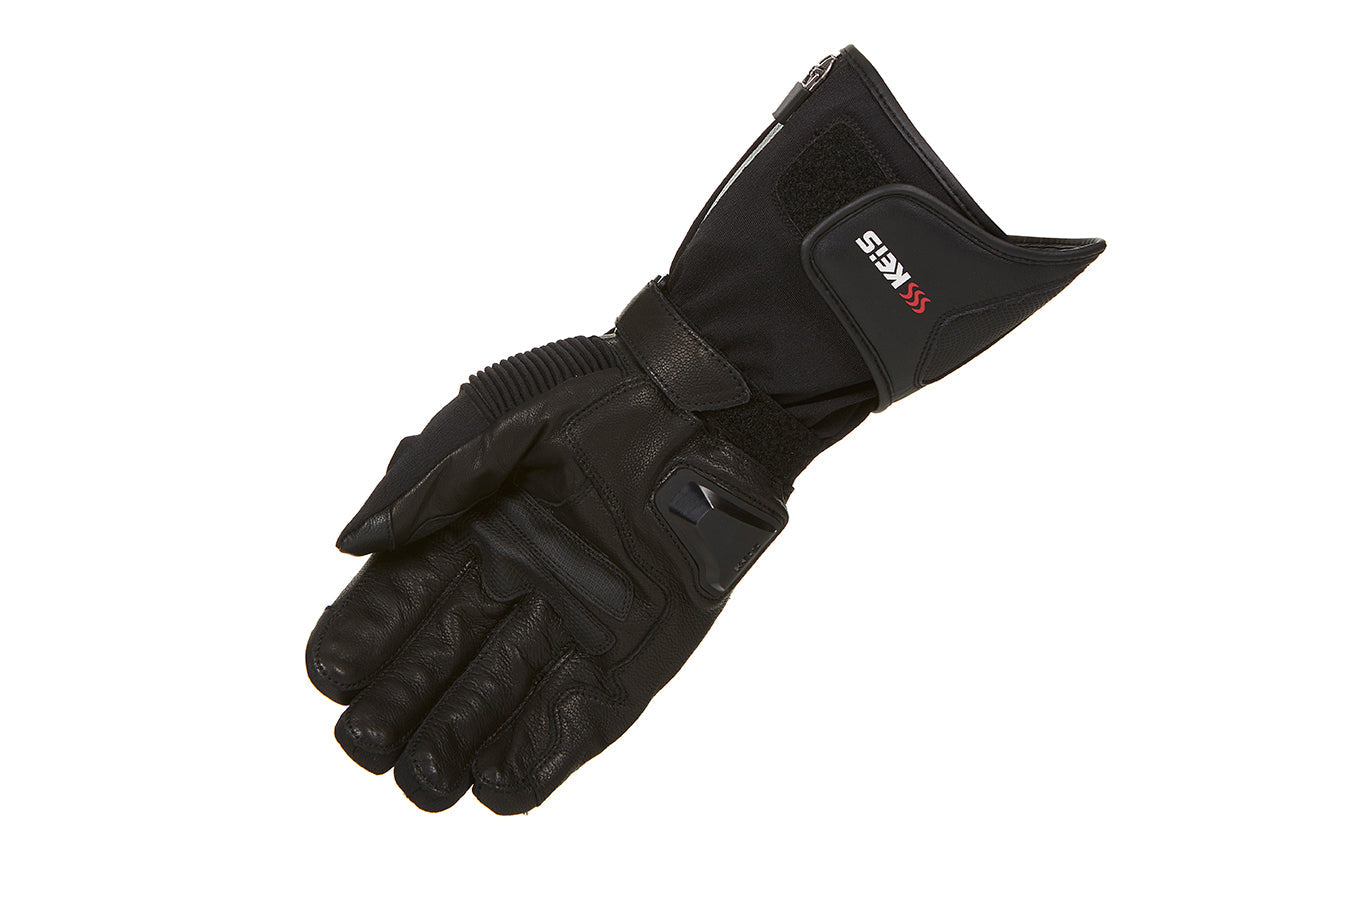 Keis heated motorcycle gloves G601 right